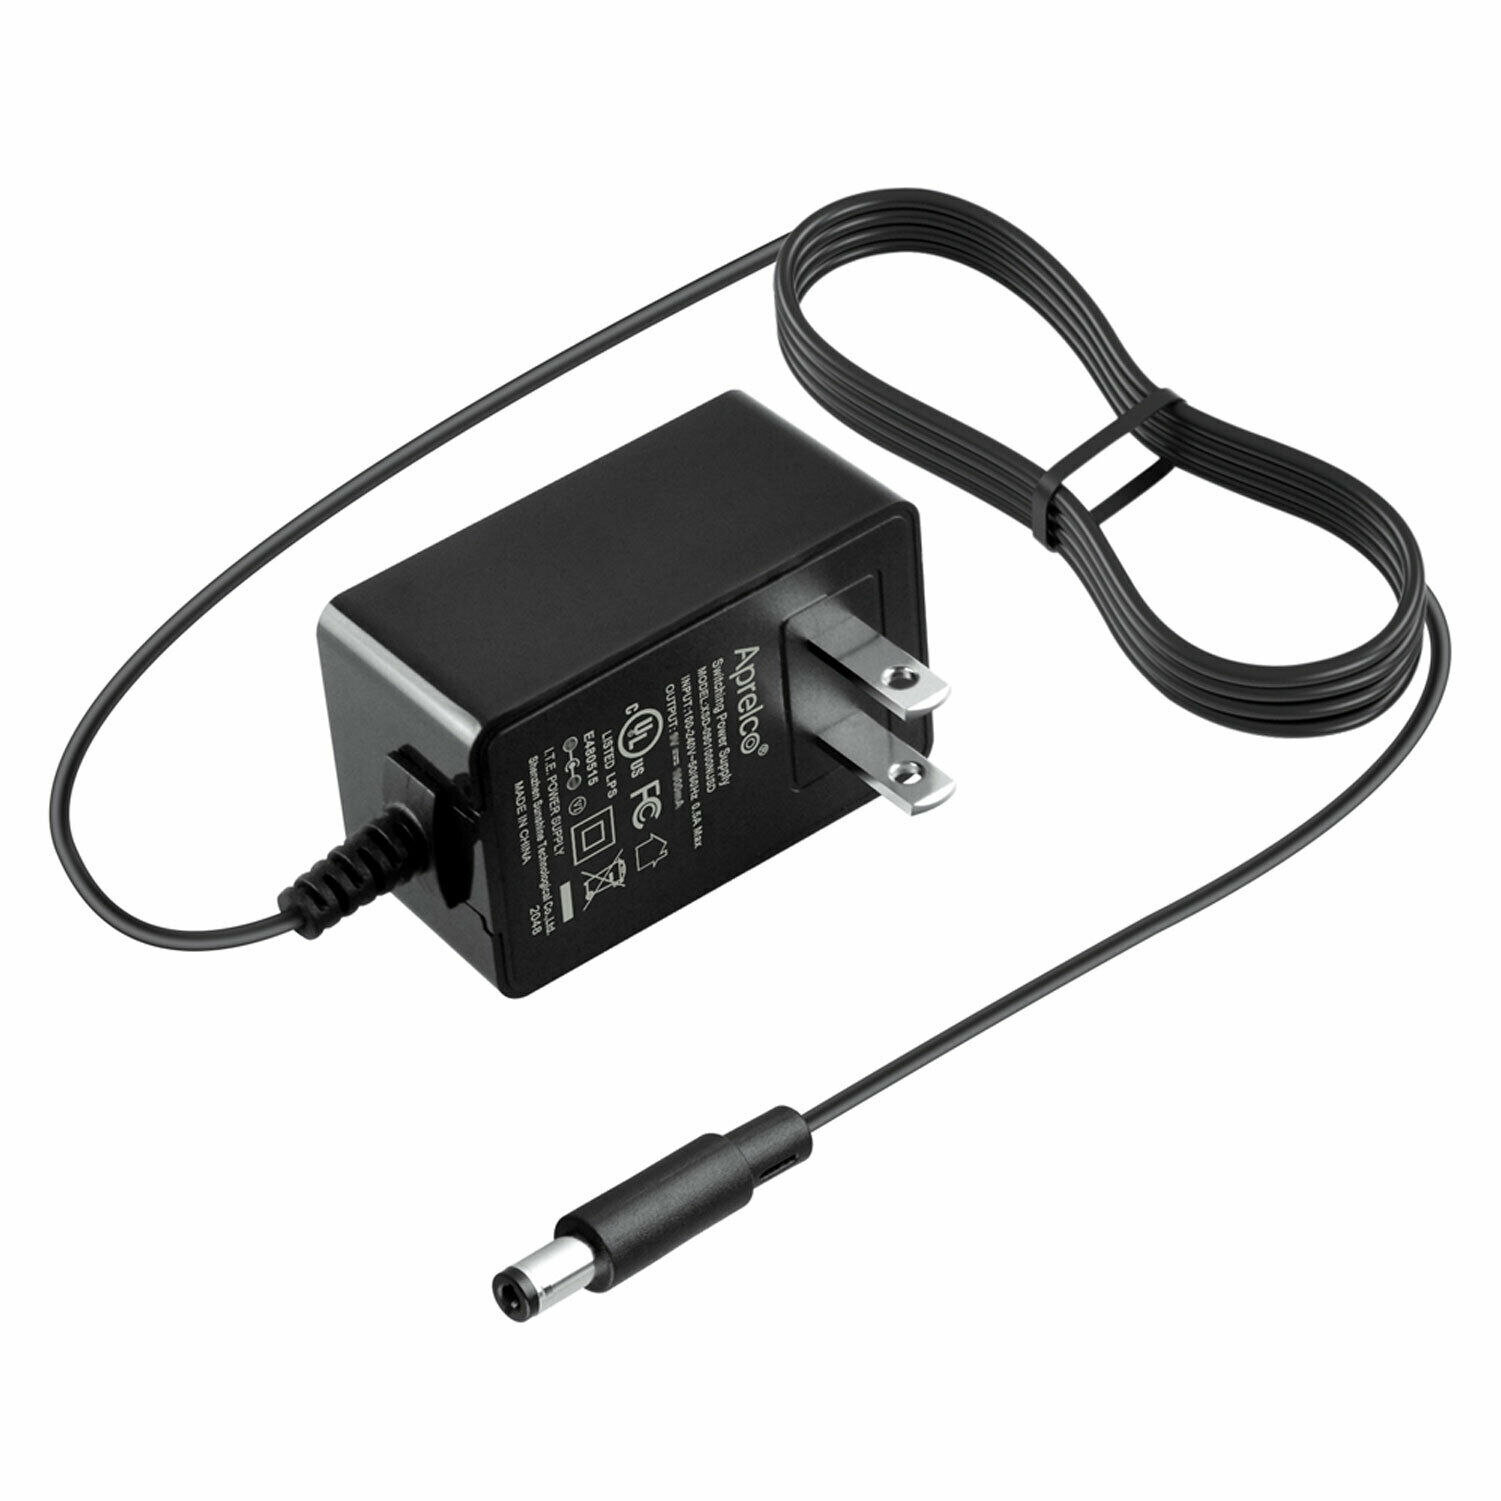 HON-KWANG D12-03A AC Adapter for D1203A Plug In Class 2 Transformer Power Supply Low Ripple and Noise. High Quality R